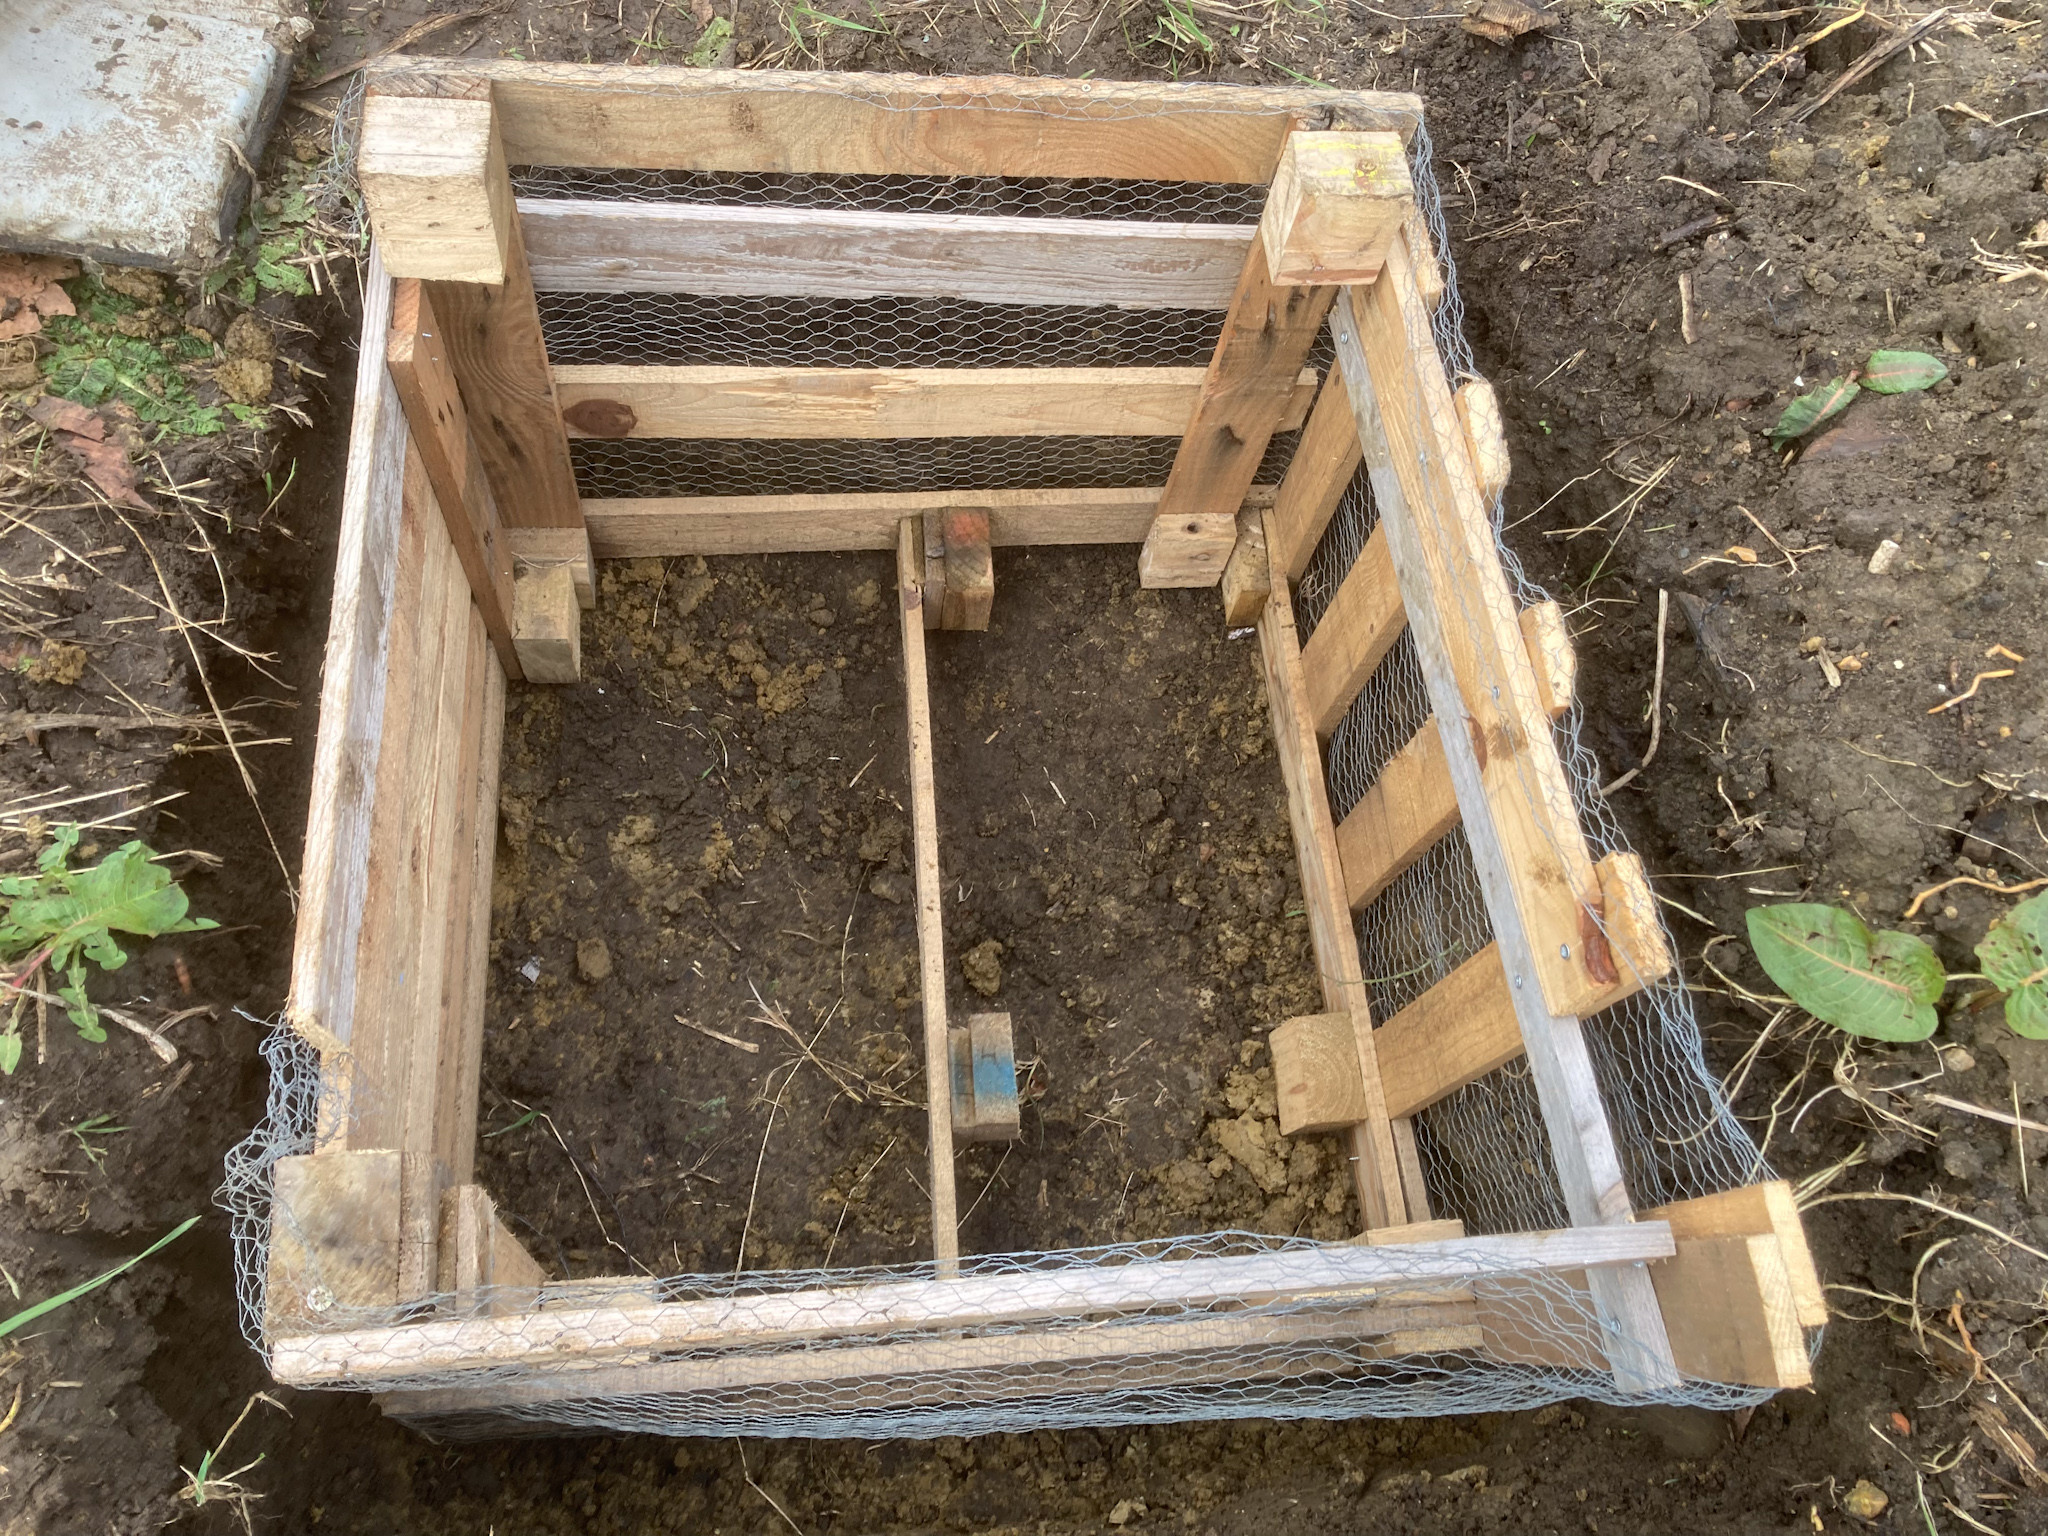 A wooden box with approximately 80 cm or 31 inch sides in a hole in the ground. The box is made from old pallet wood and offcuts with wire mesh around the sides to hopefully keep out any eager wildlife like badger or fox. The box will have a lid. Dendrobaena worms will be added together with regular additions of compostable materials and shredded cardboard for them to process into vermicast for use on the plot.